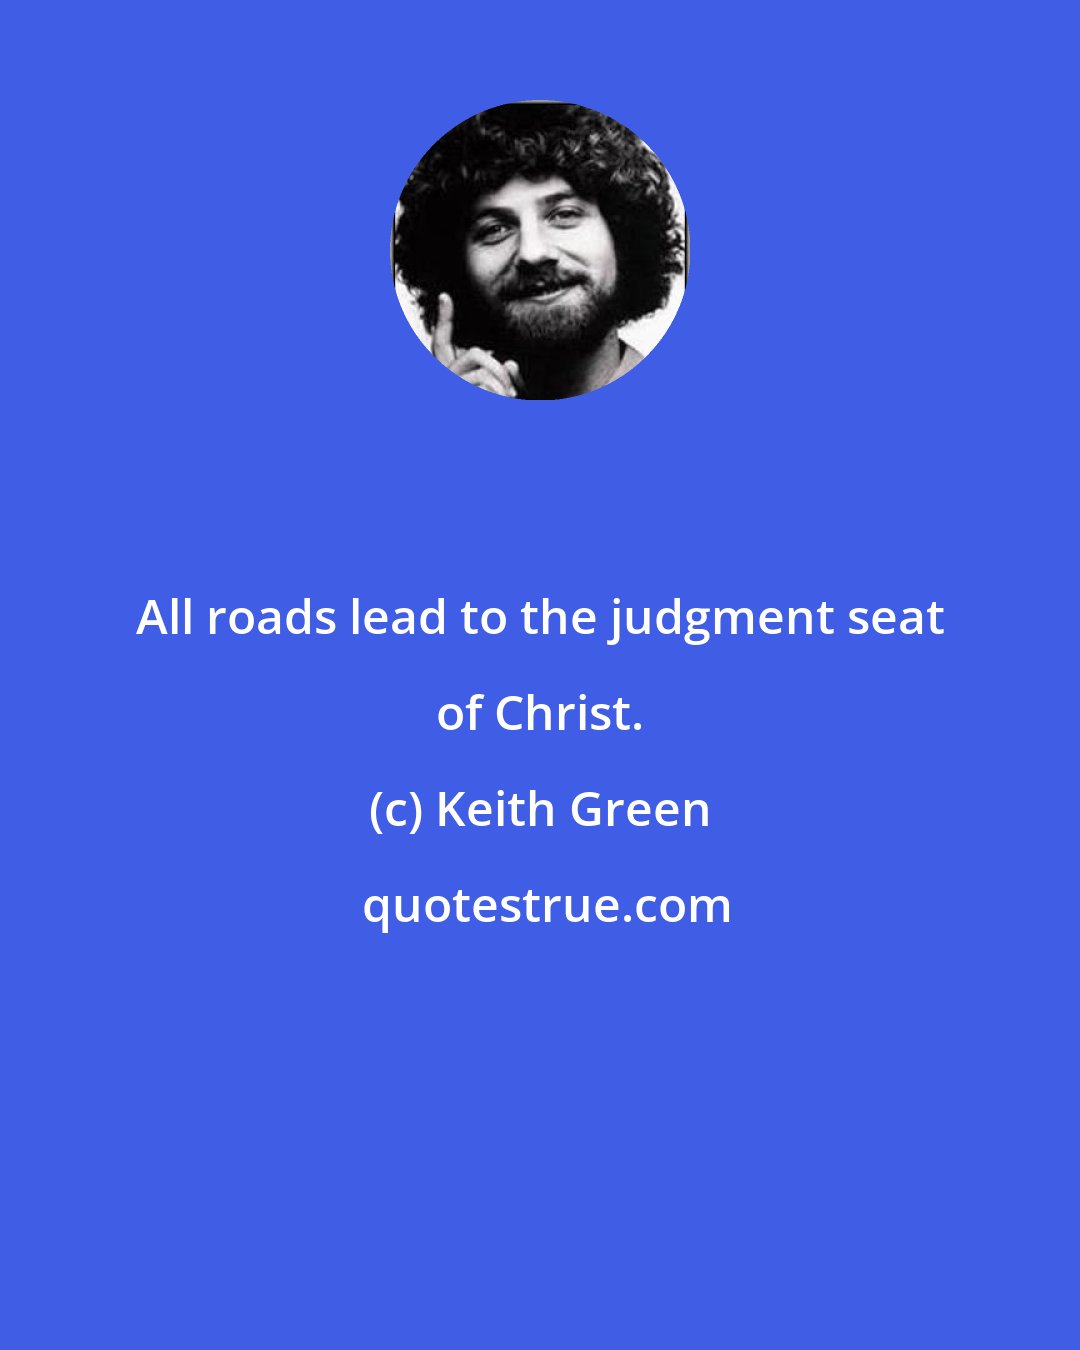 Keith Green: All roads lead to the judgment seat of Christ.